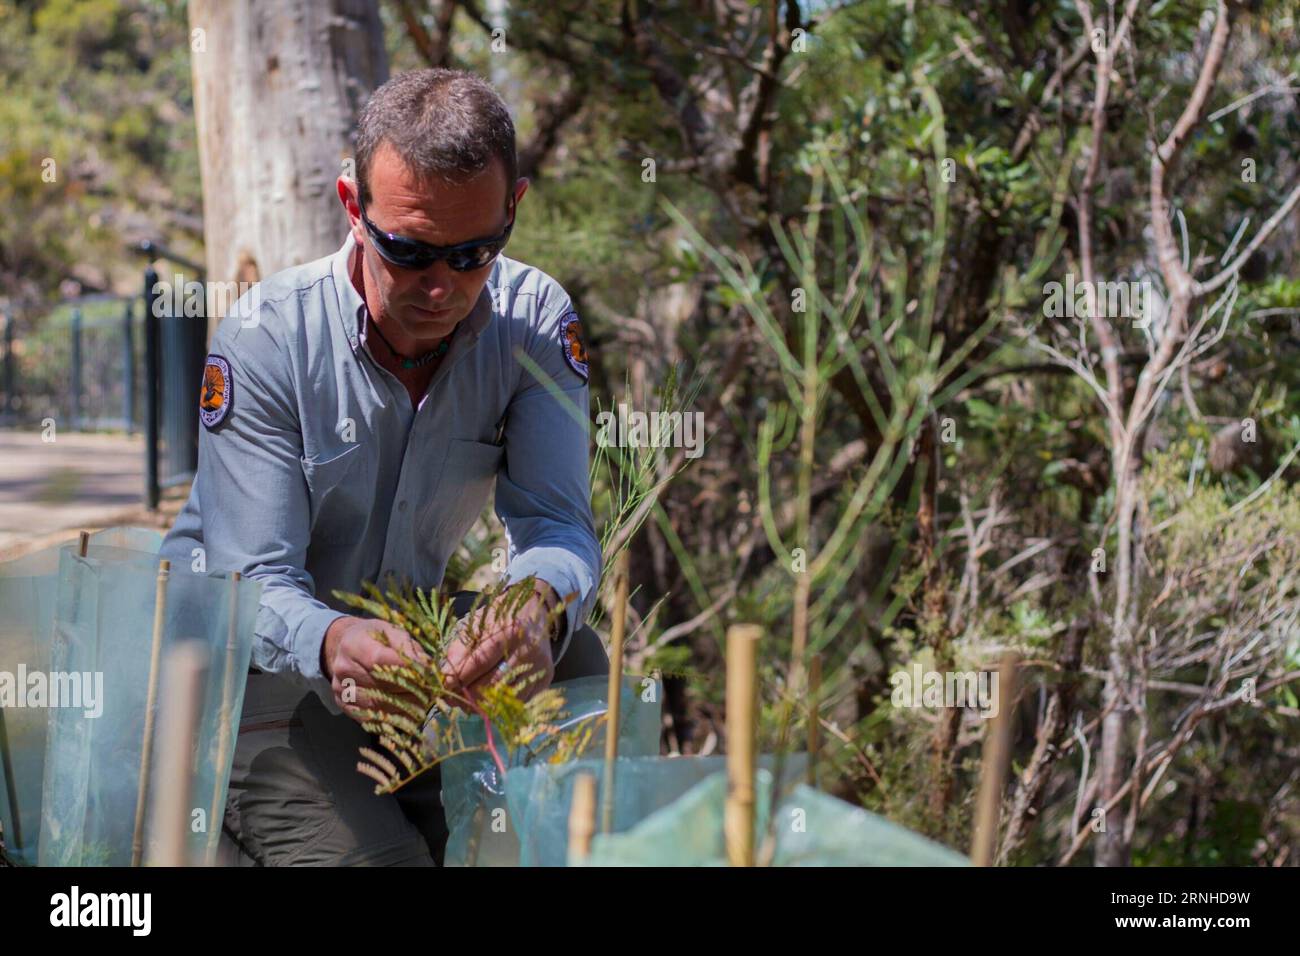 (161111) -- SYDNEY, Nov. 11, 2016 -- Park ranger Jamie Salijevic checks plants in the Blue Mountains National Park in New South Wales state, Australia, Oct. 25, 2016. Four percent of Australia s continent is protected for conservation, encompassed within just over 500 national parks, or some 28 million hectares of land. Most national parks are managed by Australia s state and territory governments -- states are responsible for land management under Australia s constitution -- though the Commonwealth Government looks after six national parks, the National Botanic Gardens and 58 individual marin Stock Photo